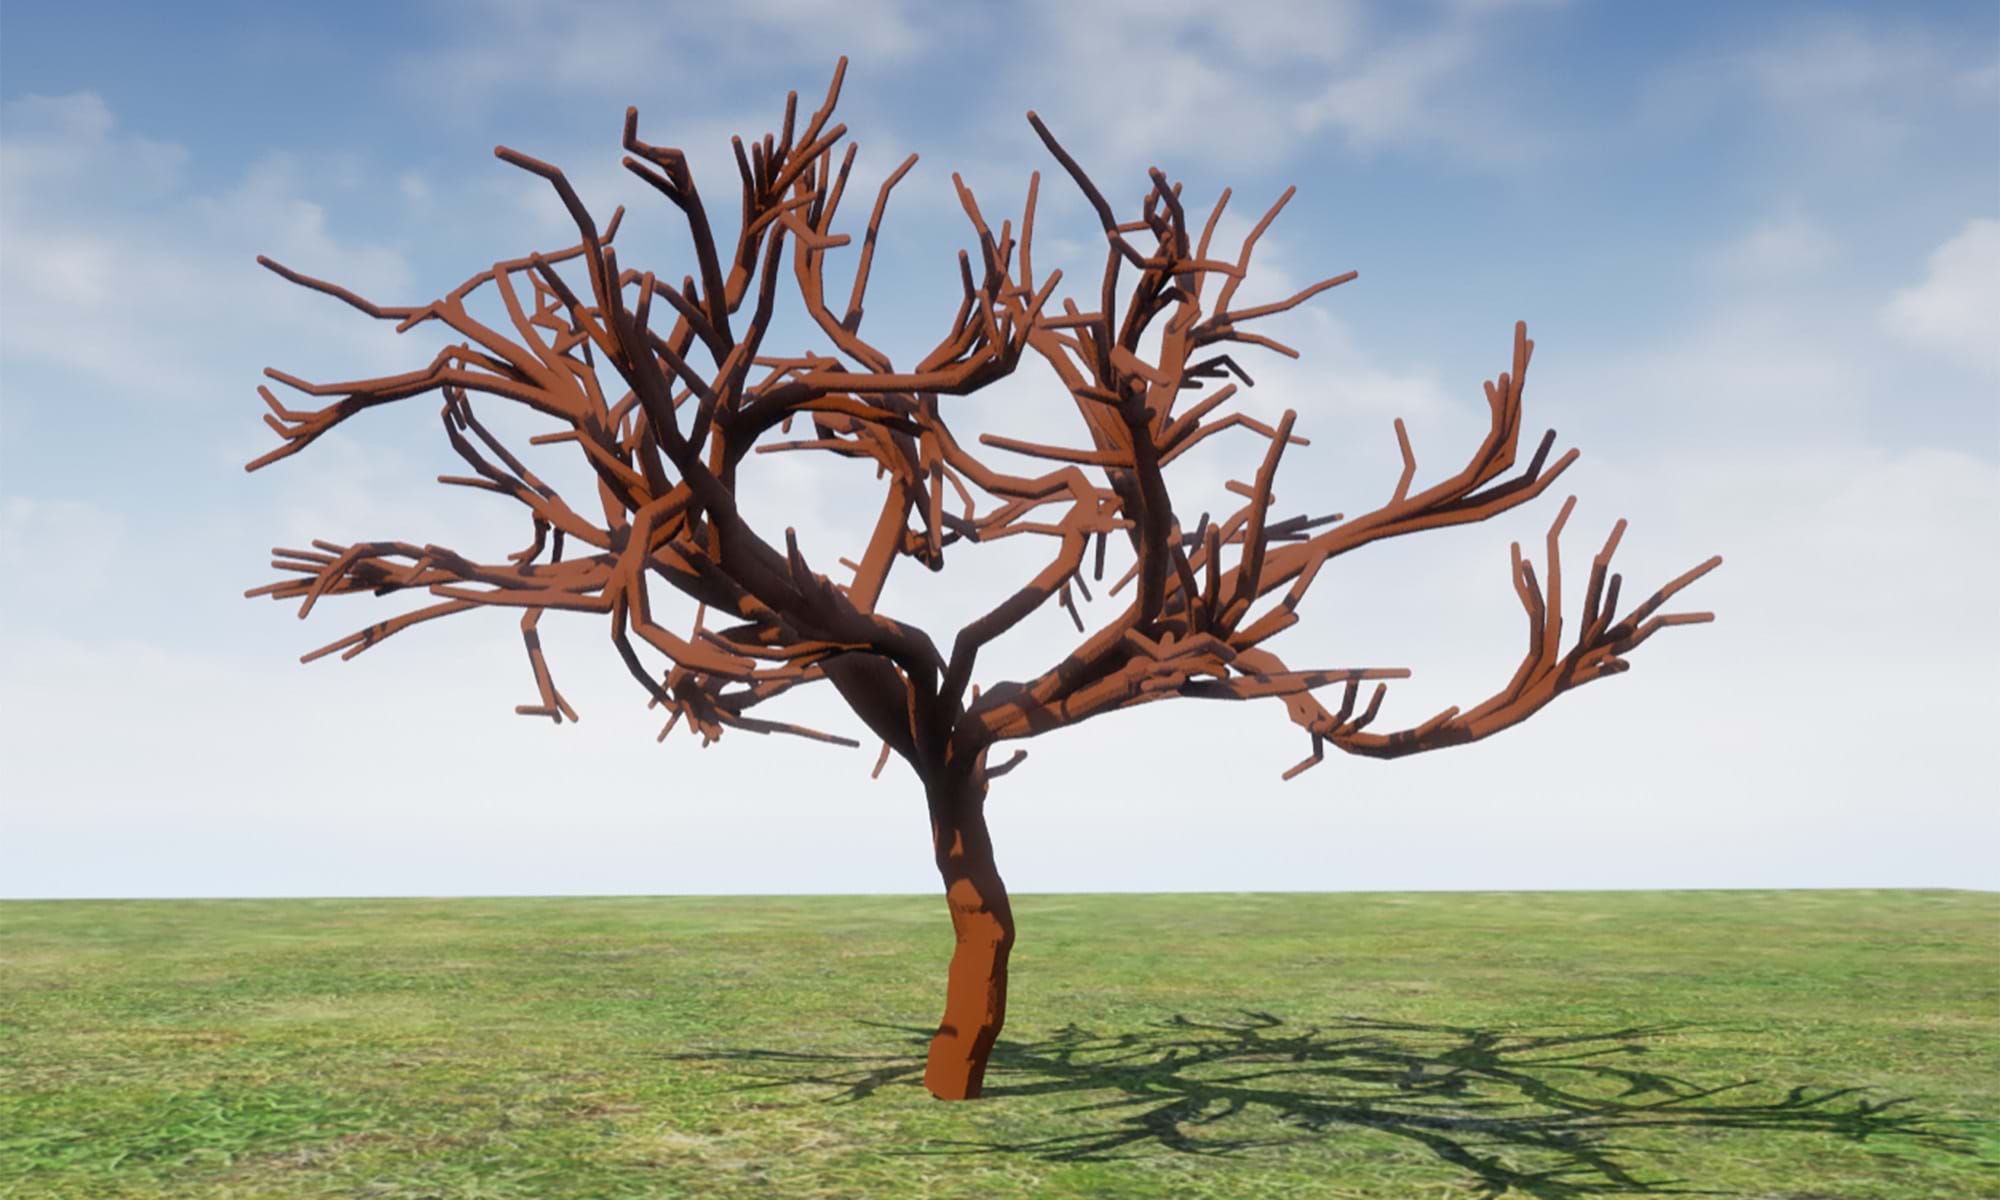 'Procedurally generating, environmentally responsive trees.' is a 2023 Digital Graduate Show project by Stylianos Zachariou, a Computer Game Applications Development student at Abertay University.